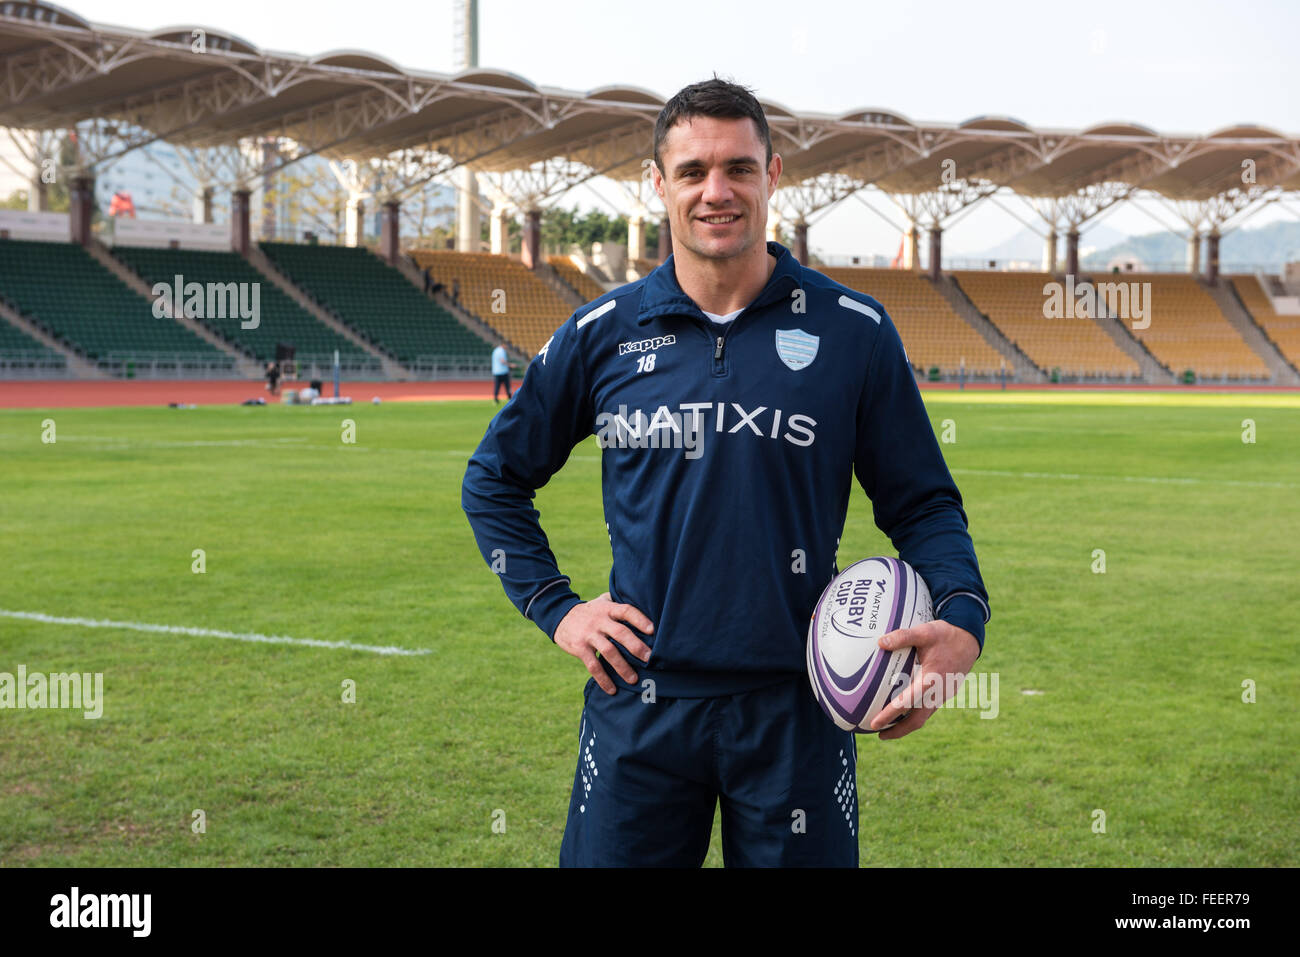 Hong Kong, Hong Kong S.A.R, China. 5th Feb, 2016. Official captains photo ahead of the upcoming match between New Zealand's Super League team, The Highlanders and French team, Racing 92. Kiwi DAN CARTER from French team Racing 92 © Jayne Russell/ZUMA Wire/Alamy Live News Stock Photo